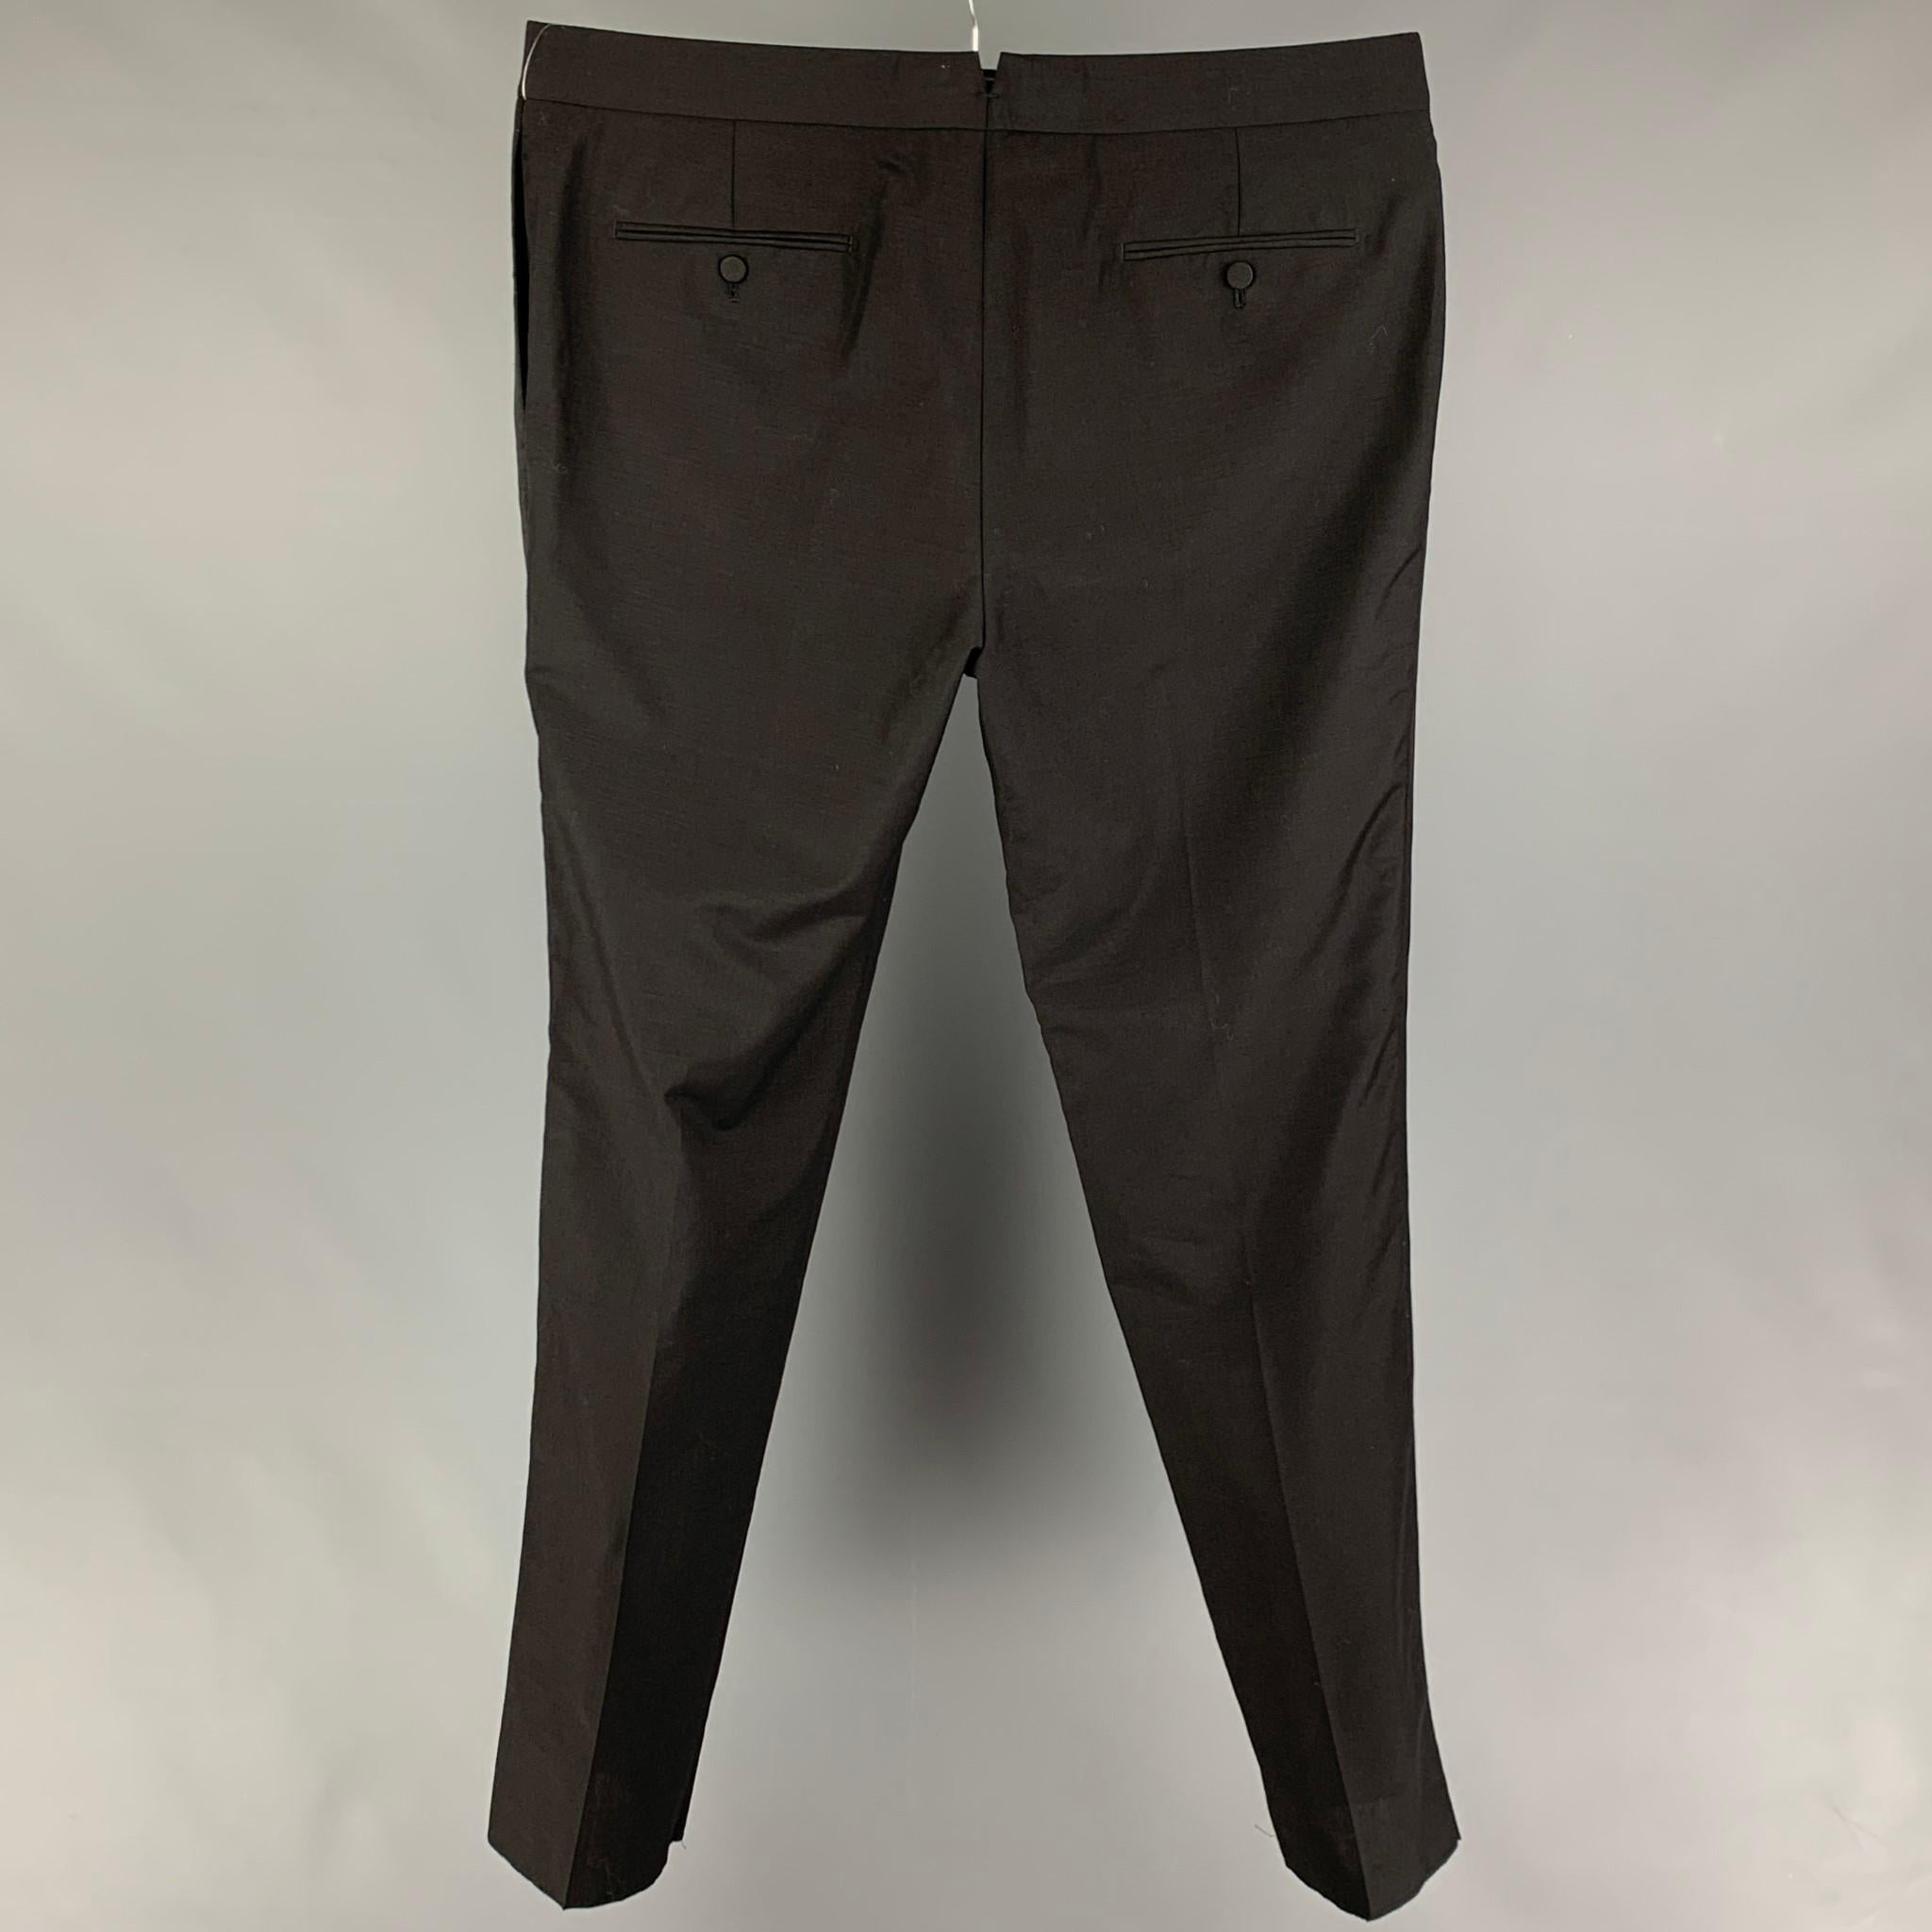 ALEXANDER McQUEEN tuxedo pants comes in a black wool / mohair featuring a flat front, ribbon trim, front tab, and a zip fly closure. Made in Italy. 

Excellent Pre-Owned Condition.
Marked: 58

Measurements:

Waist: 40 in.
Rise: 12.5 in.
Inseam: 37